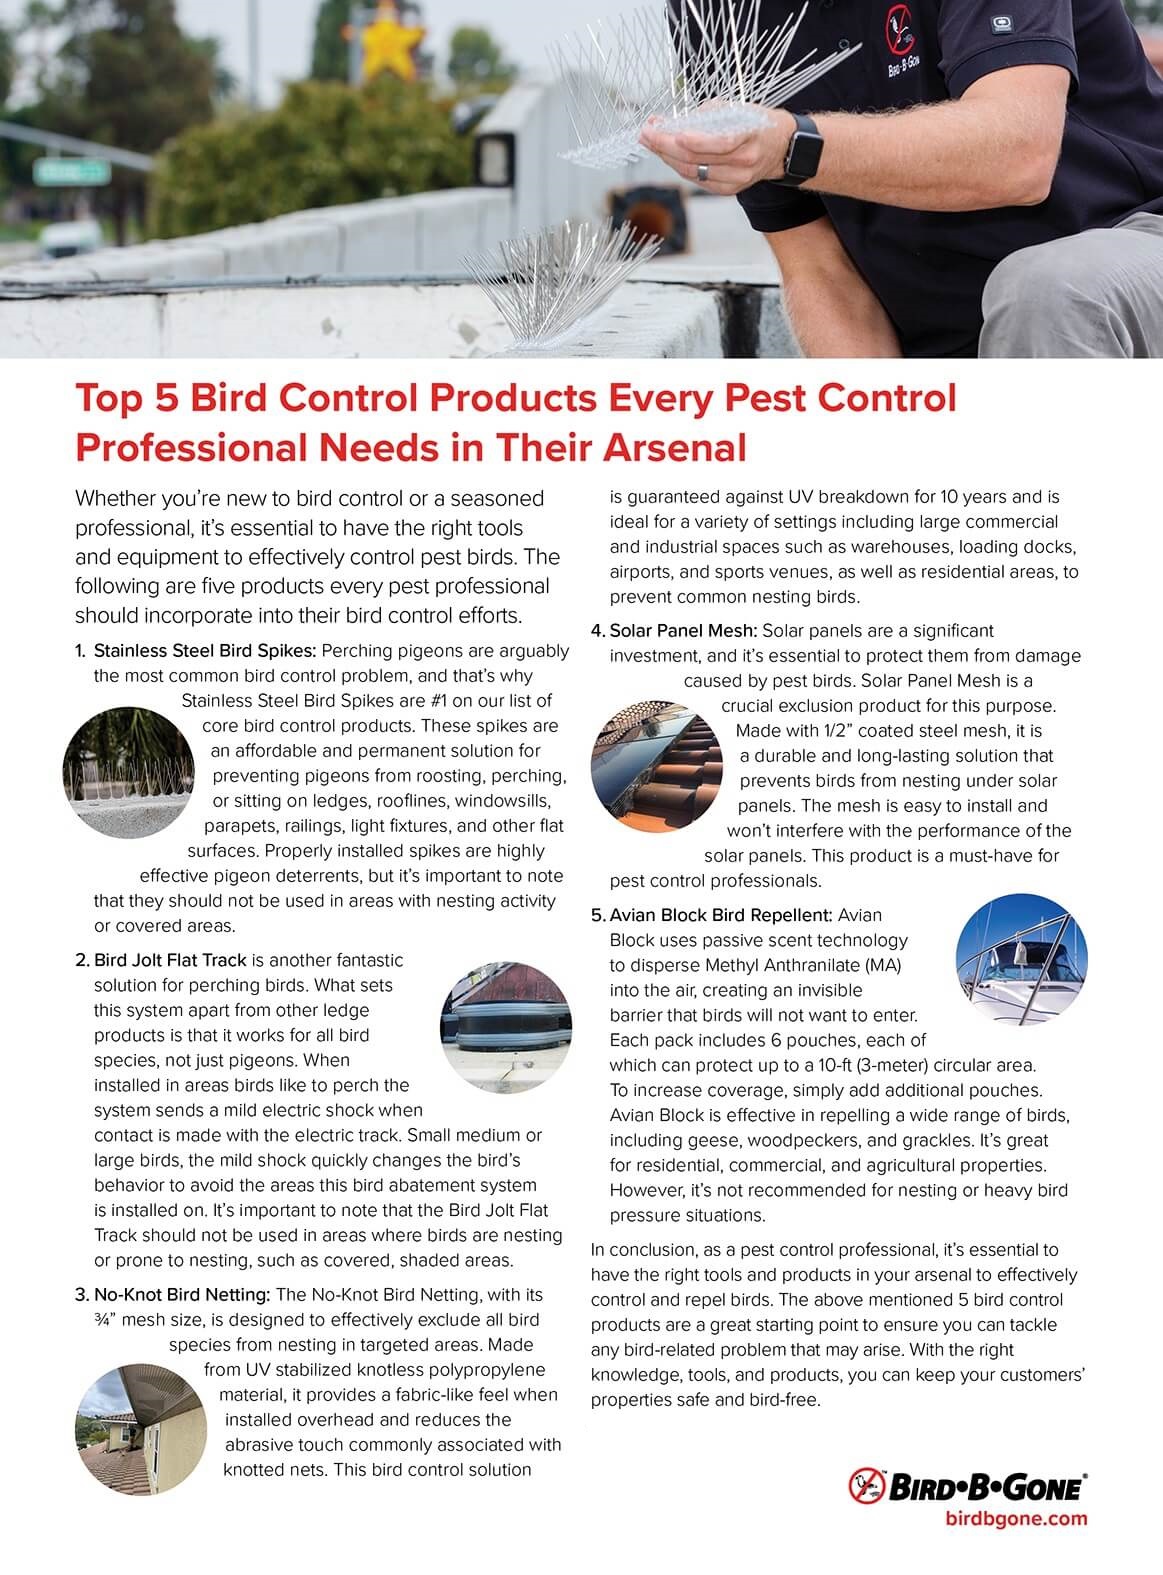 Top 5 Bird Control Products Every Pest Control Professional Needs in their Arsenal